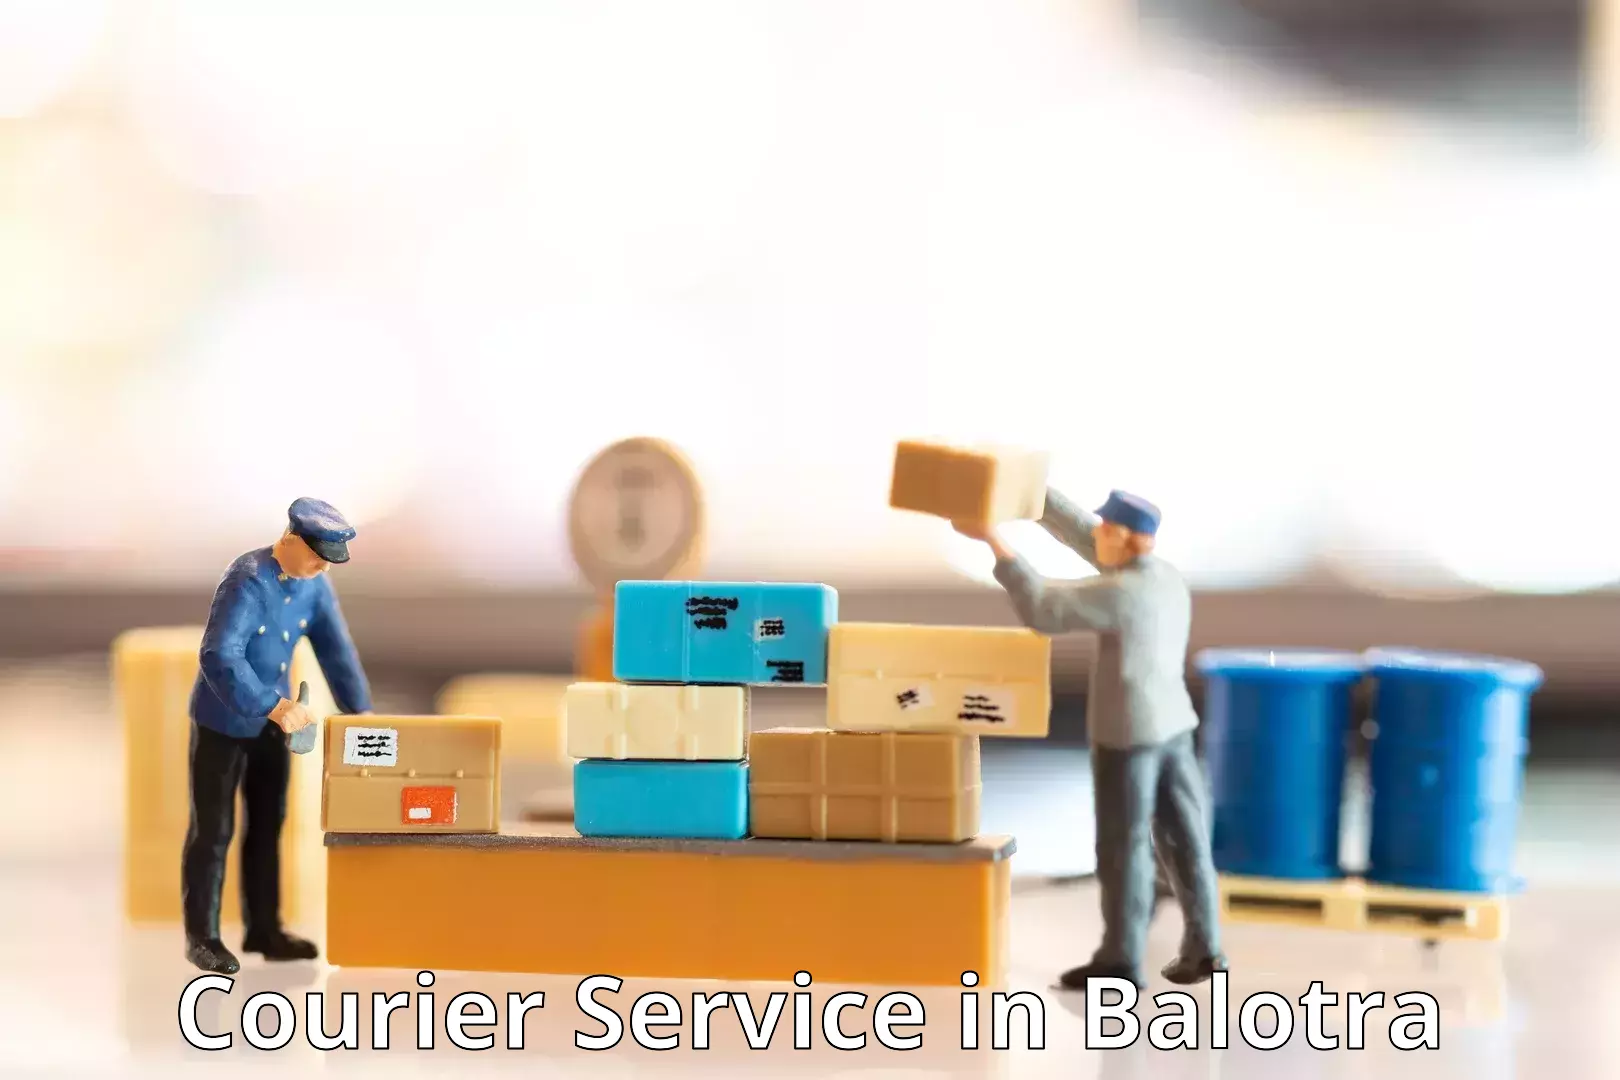 Courier dispatch services in Balotra